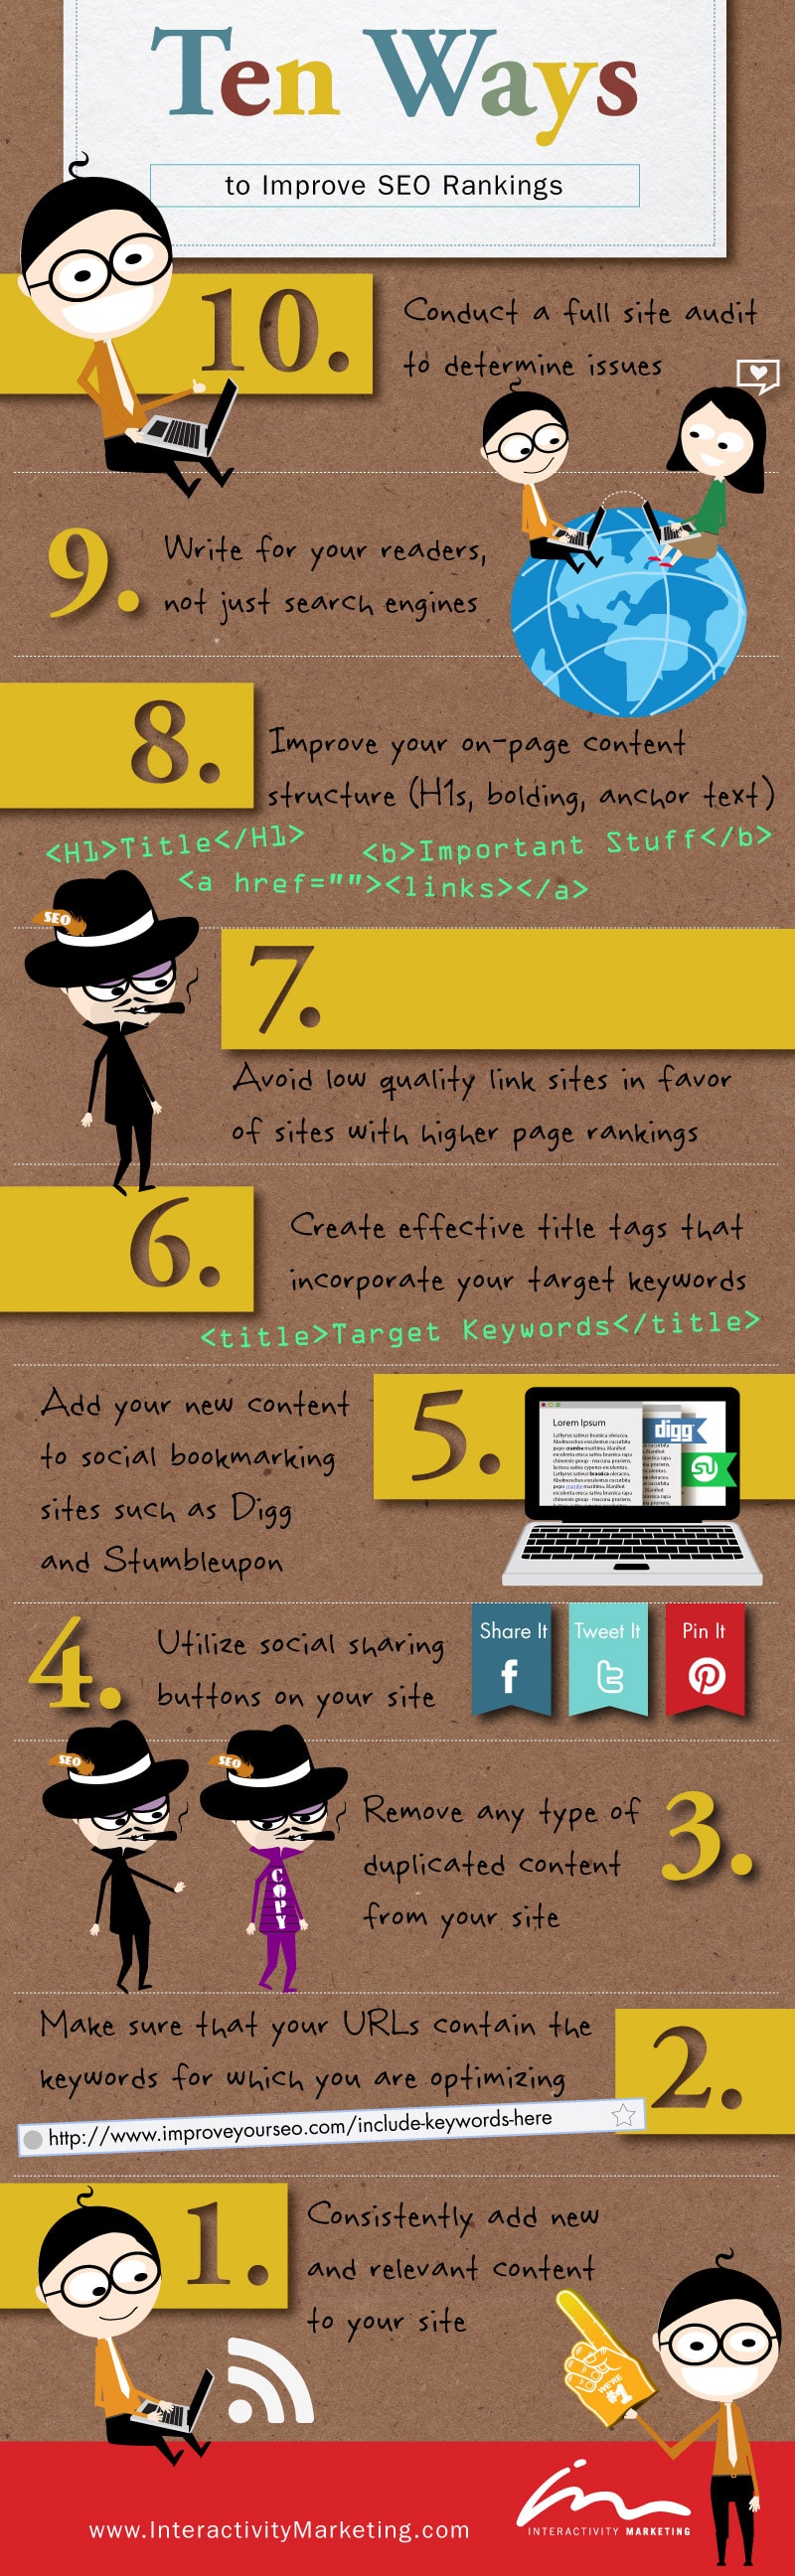 10 Simple Ways To Quickly Improve SEO Rankings [Infographic]